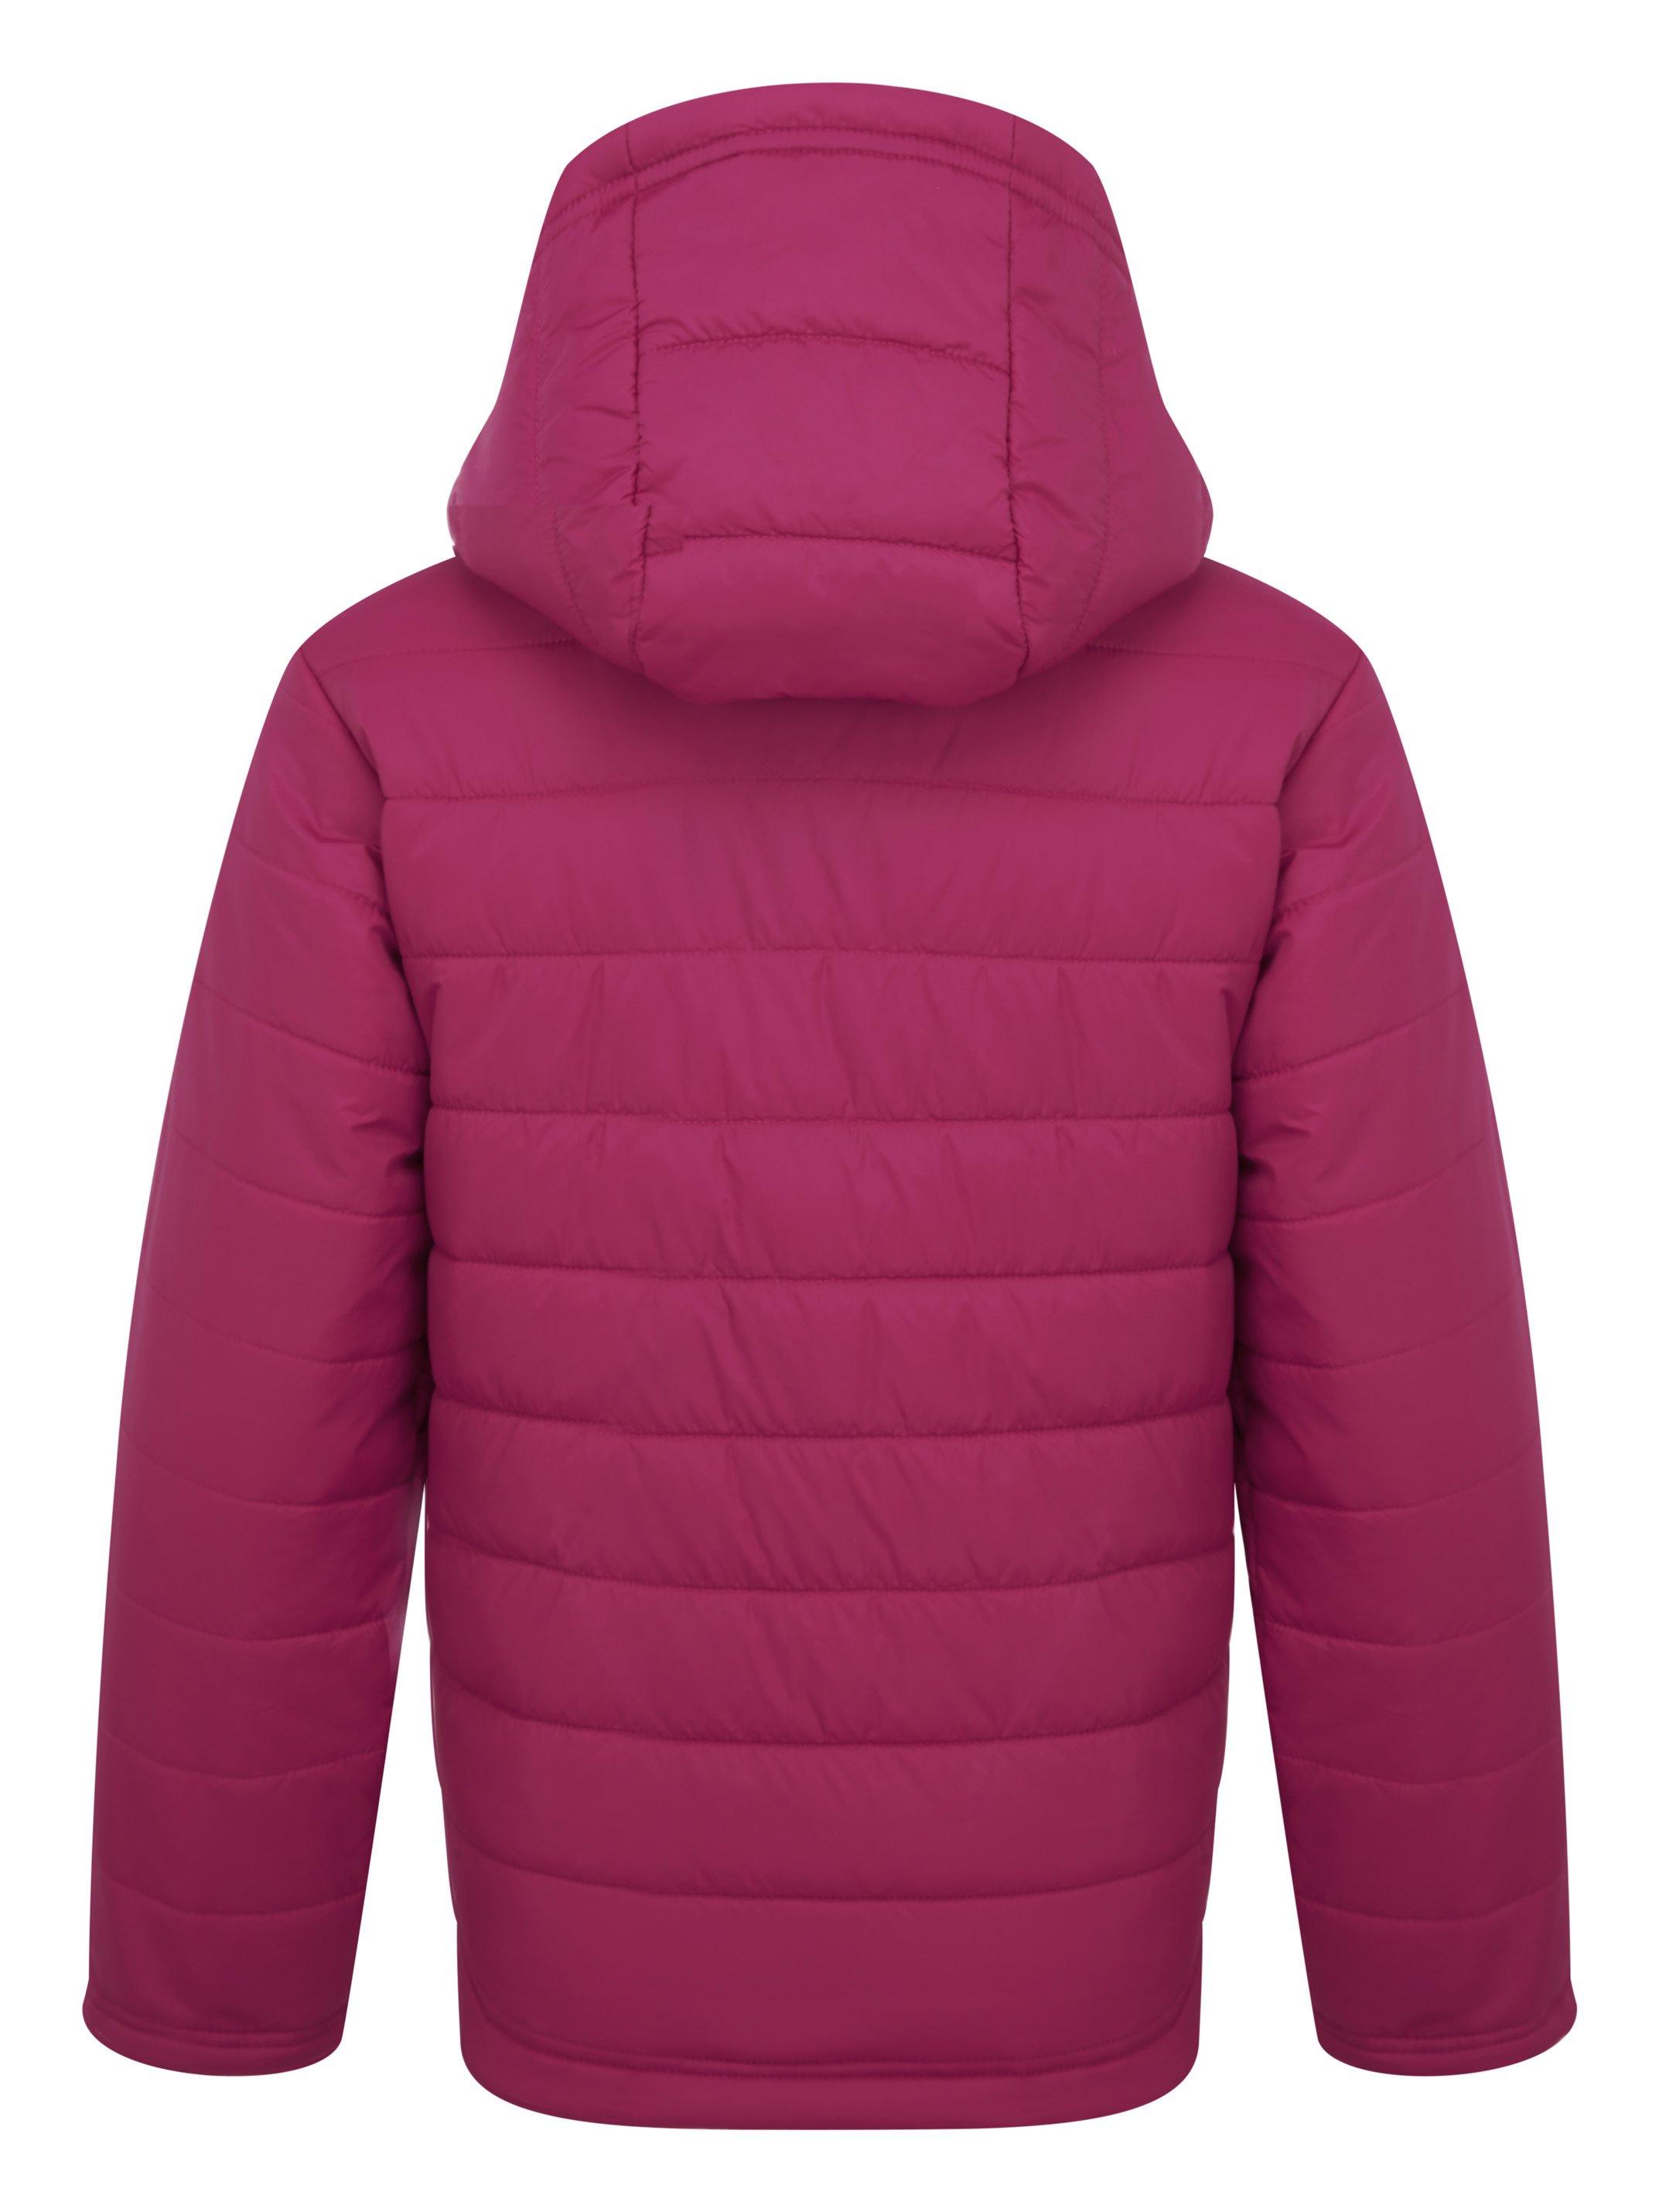 FreedomTrail Kid's Blisco Hooded Jacket Review